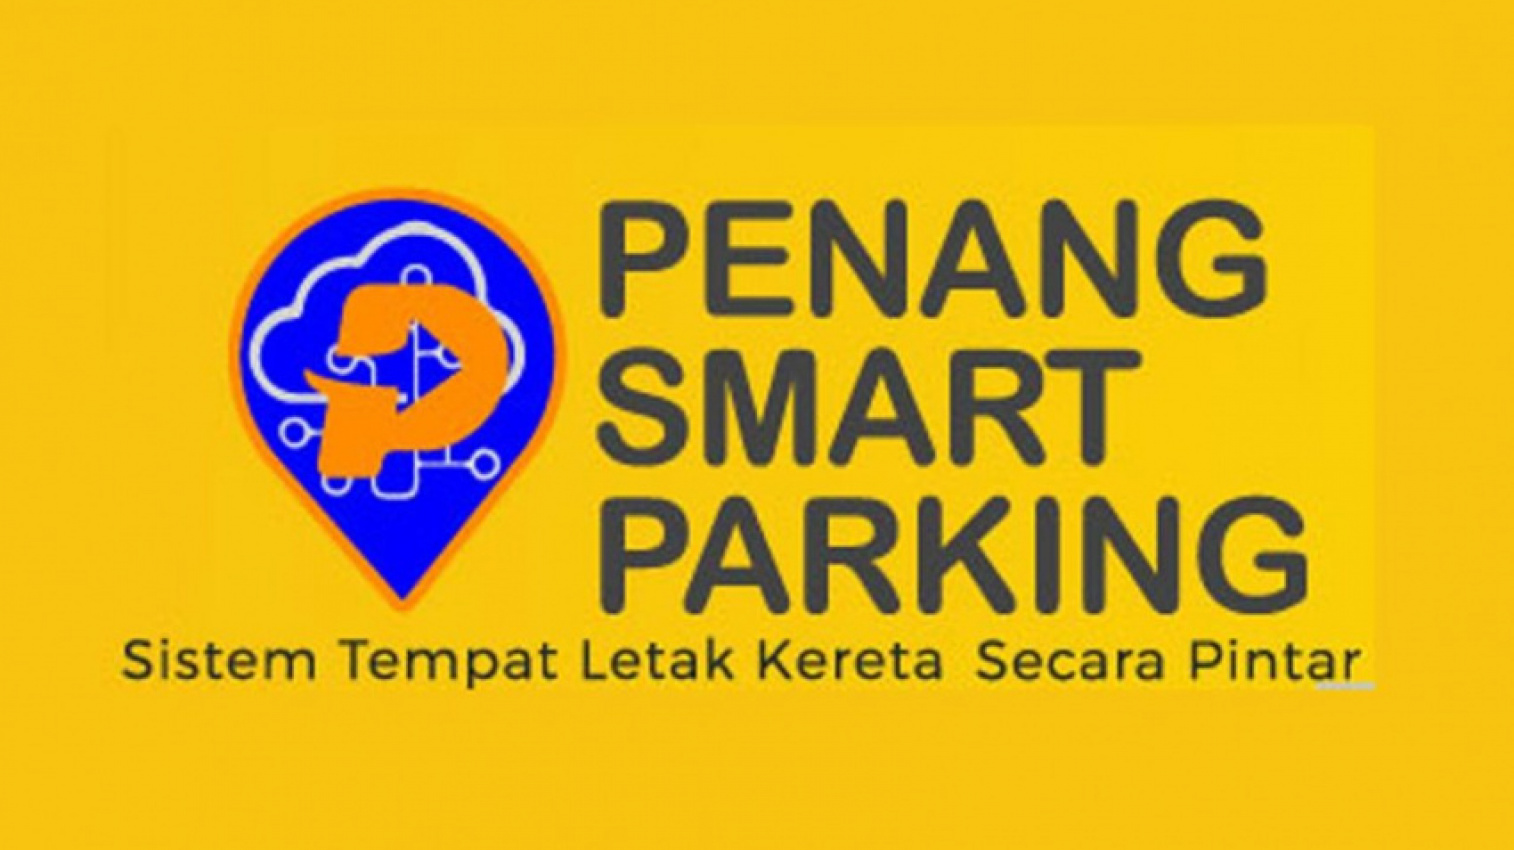 all articles, autos, cars, go cashless with parking apps in malaysia